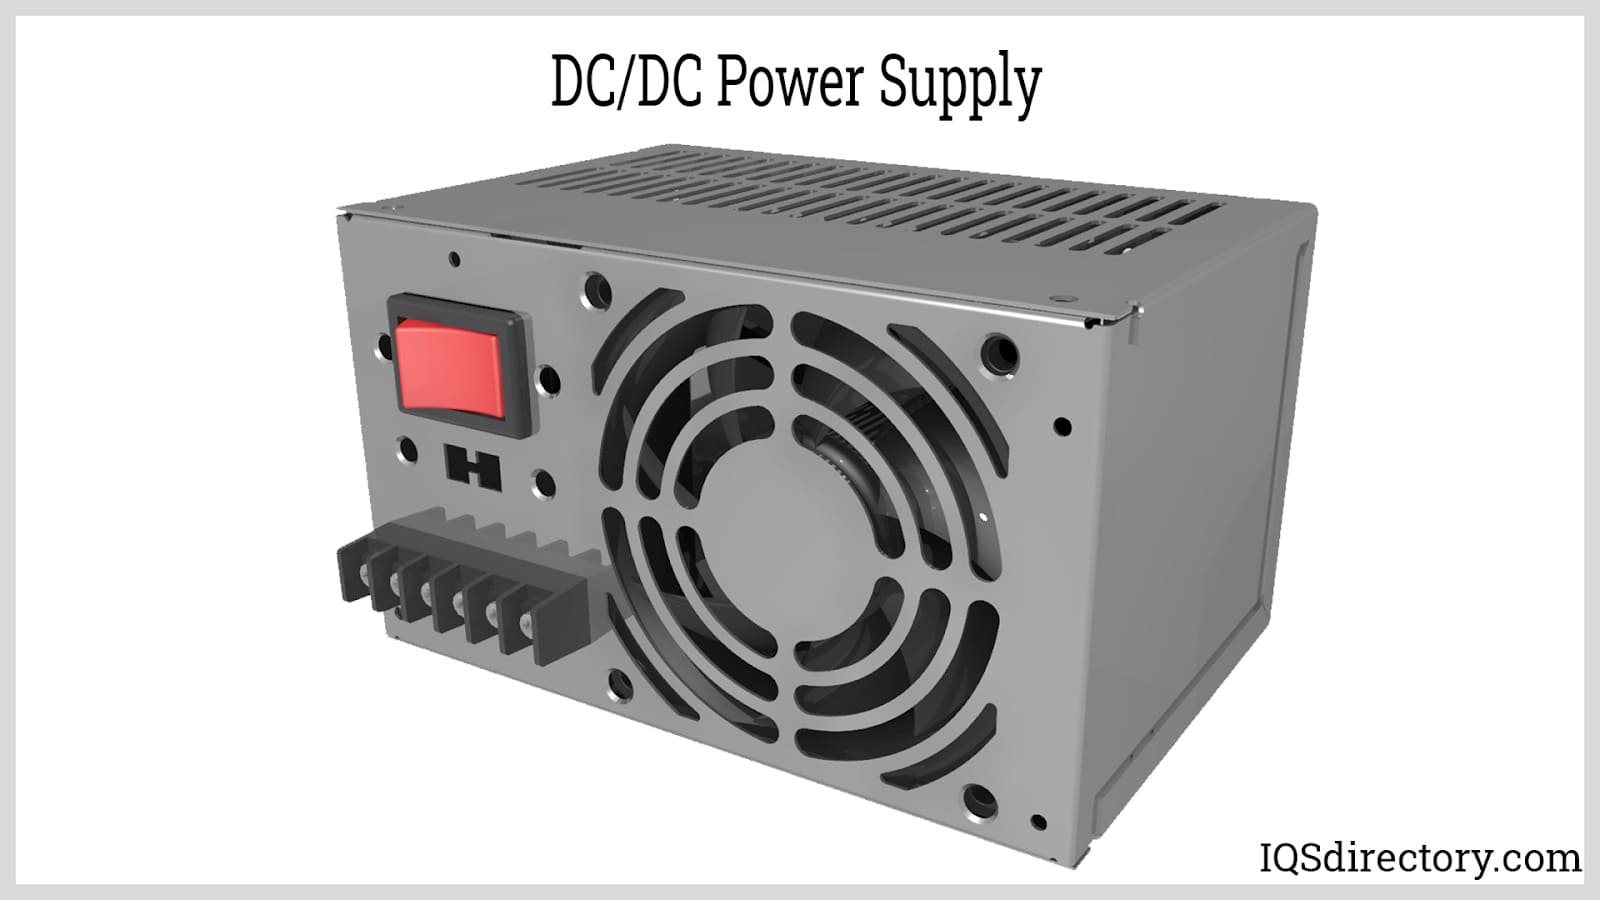 DC DC Power Supply: Types, Applications, Benefits, and Design